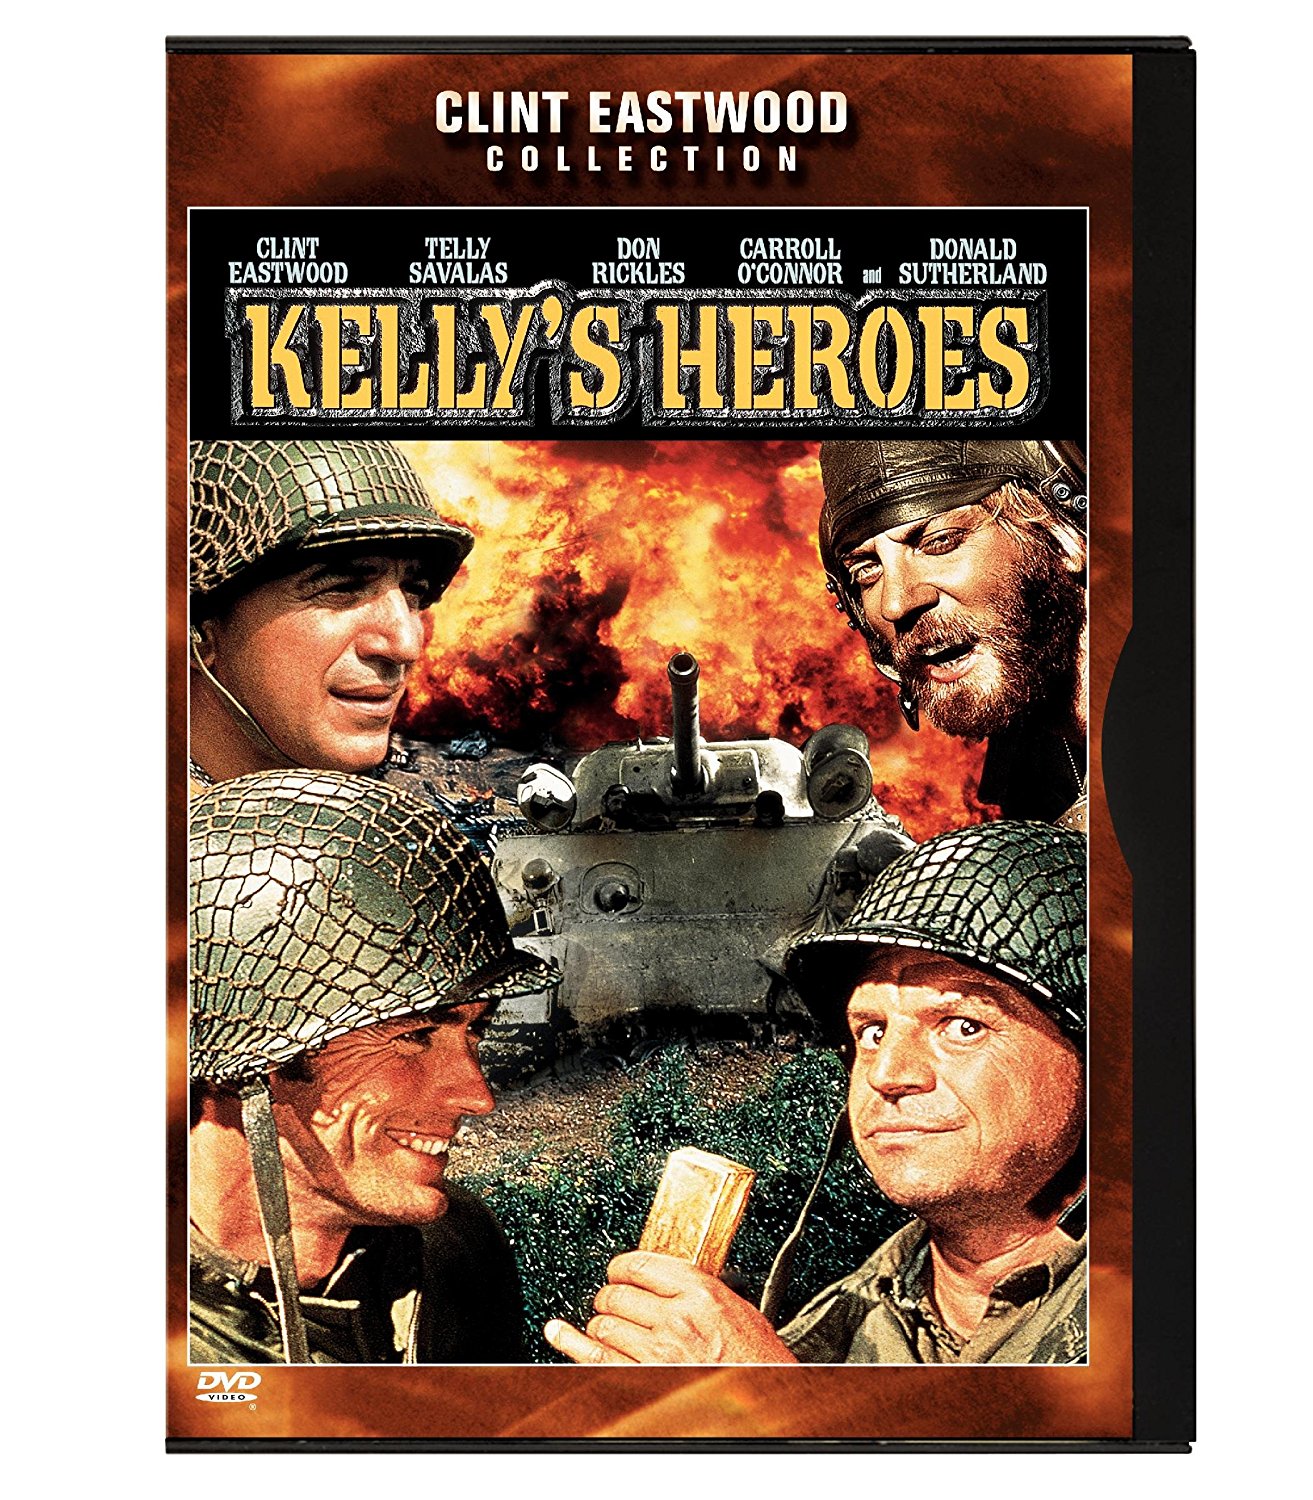 Amazon.com: Kelly's Heroes: Clint Eastwood, Telly Savalas, Don Rickles...